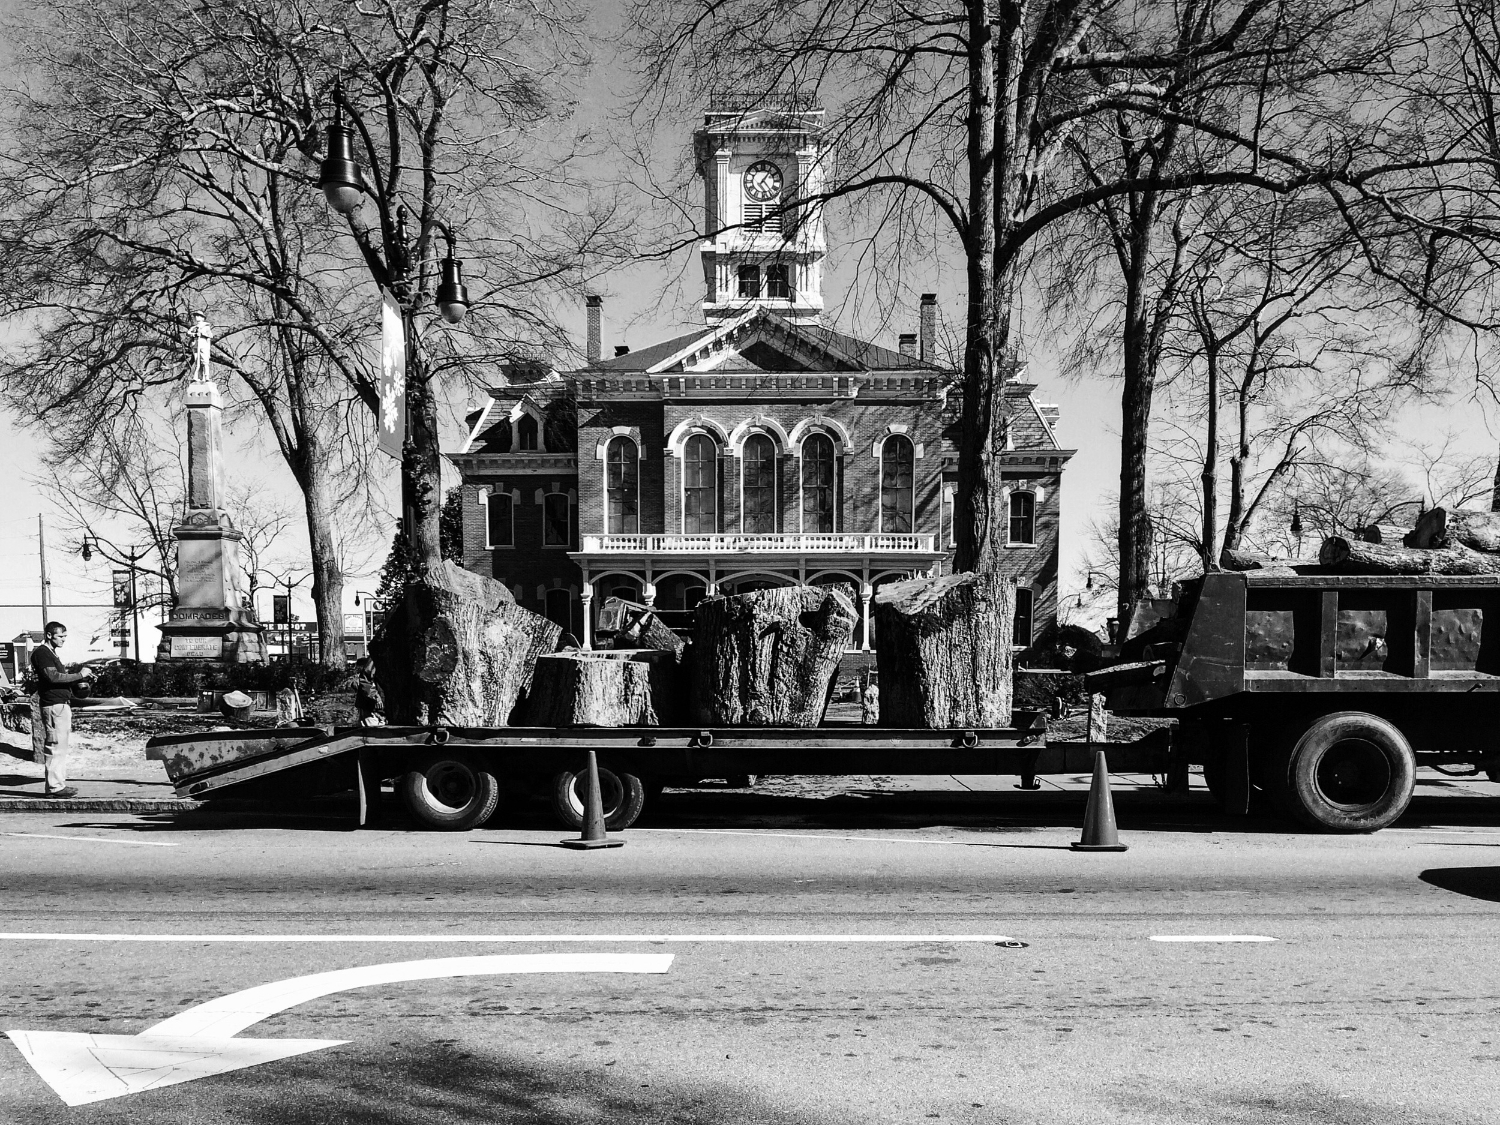  The day the original trees were cut down on the Courthouse lawn 